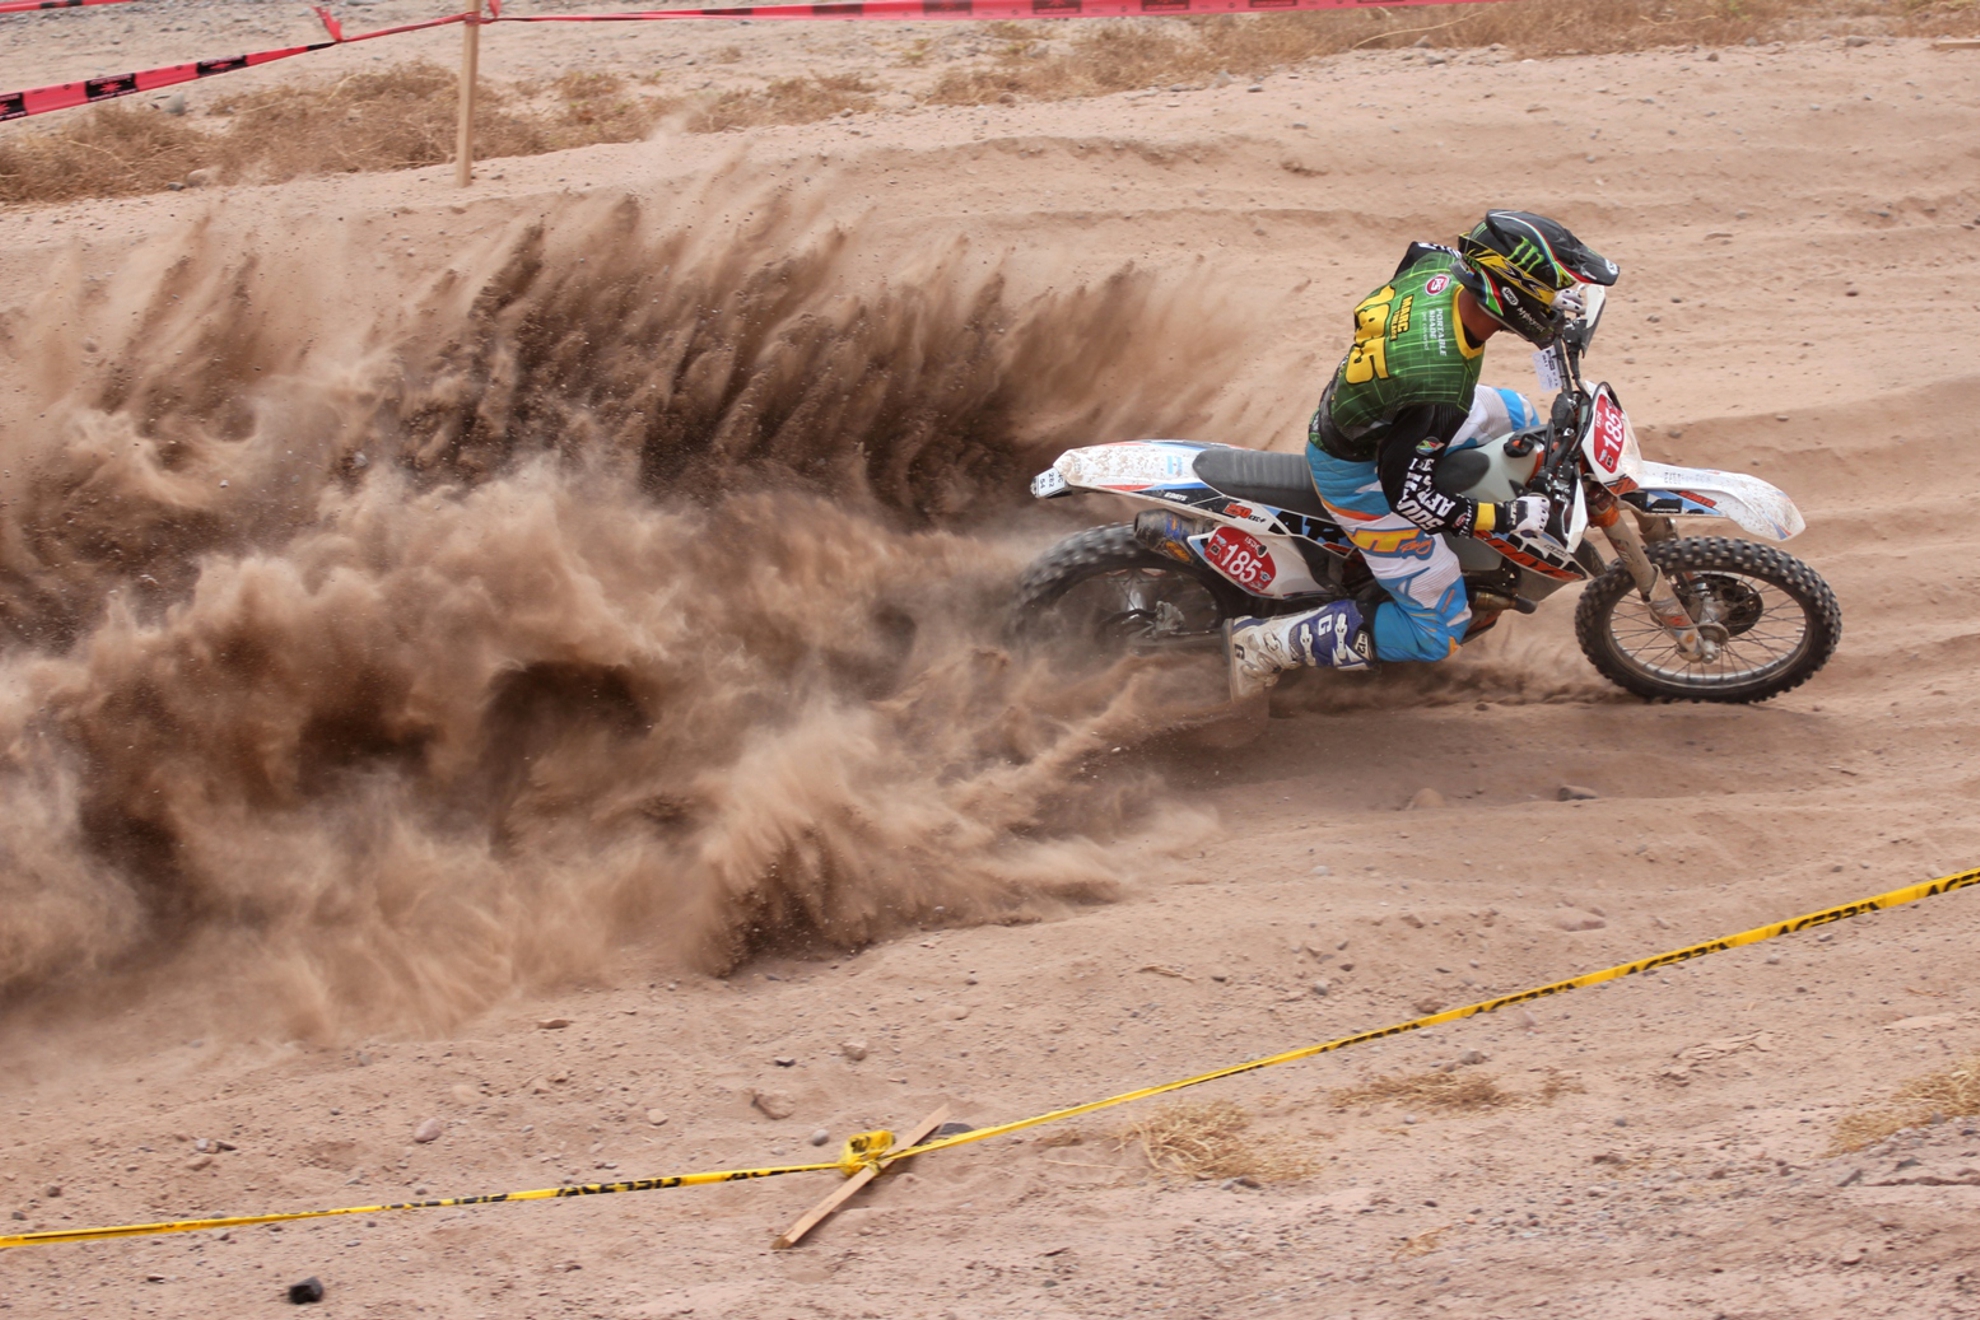 Medals experience for team South Africa after six days of enduro racing in Argentina